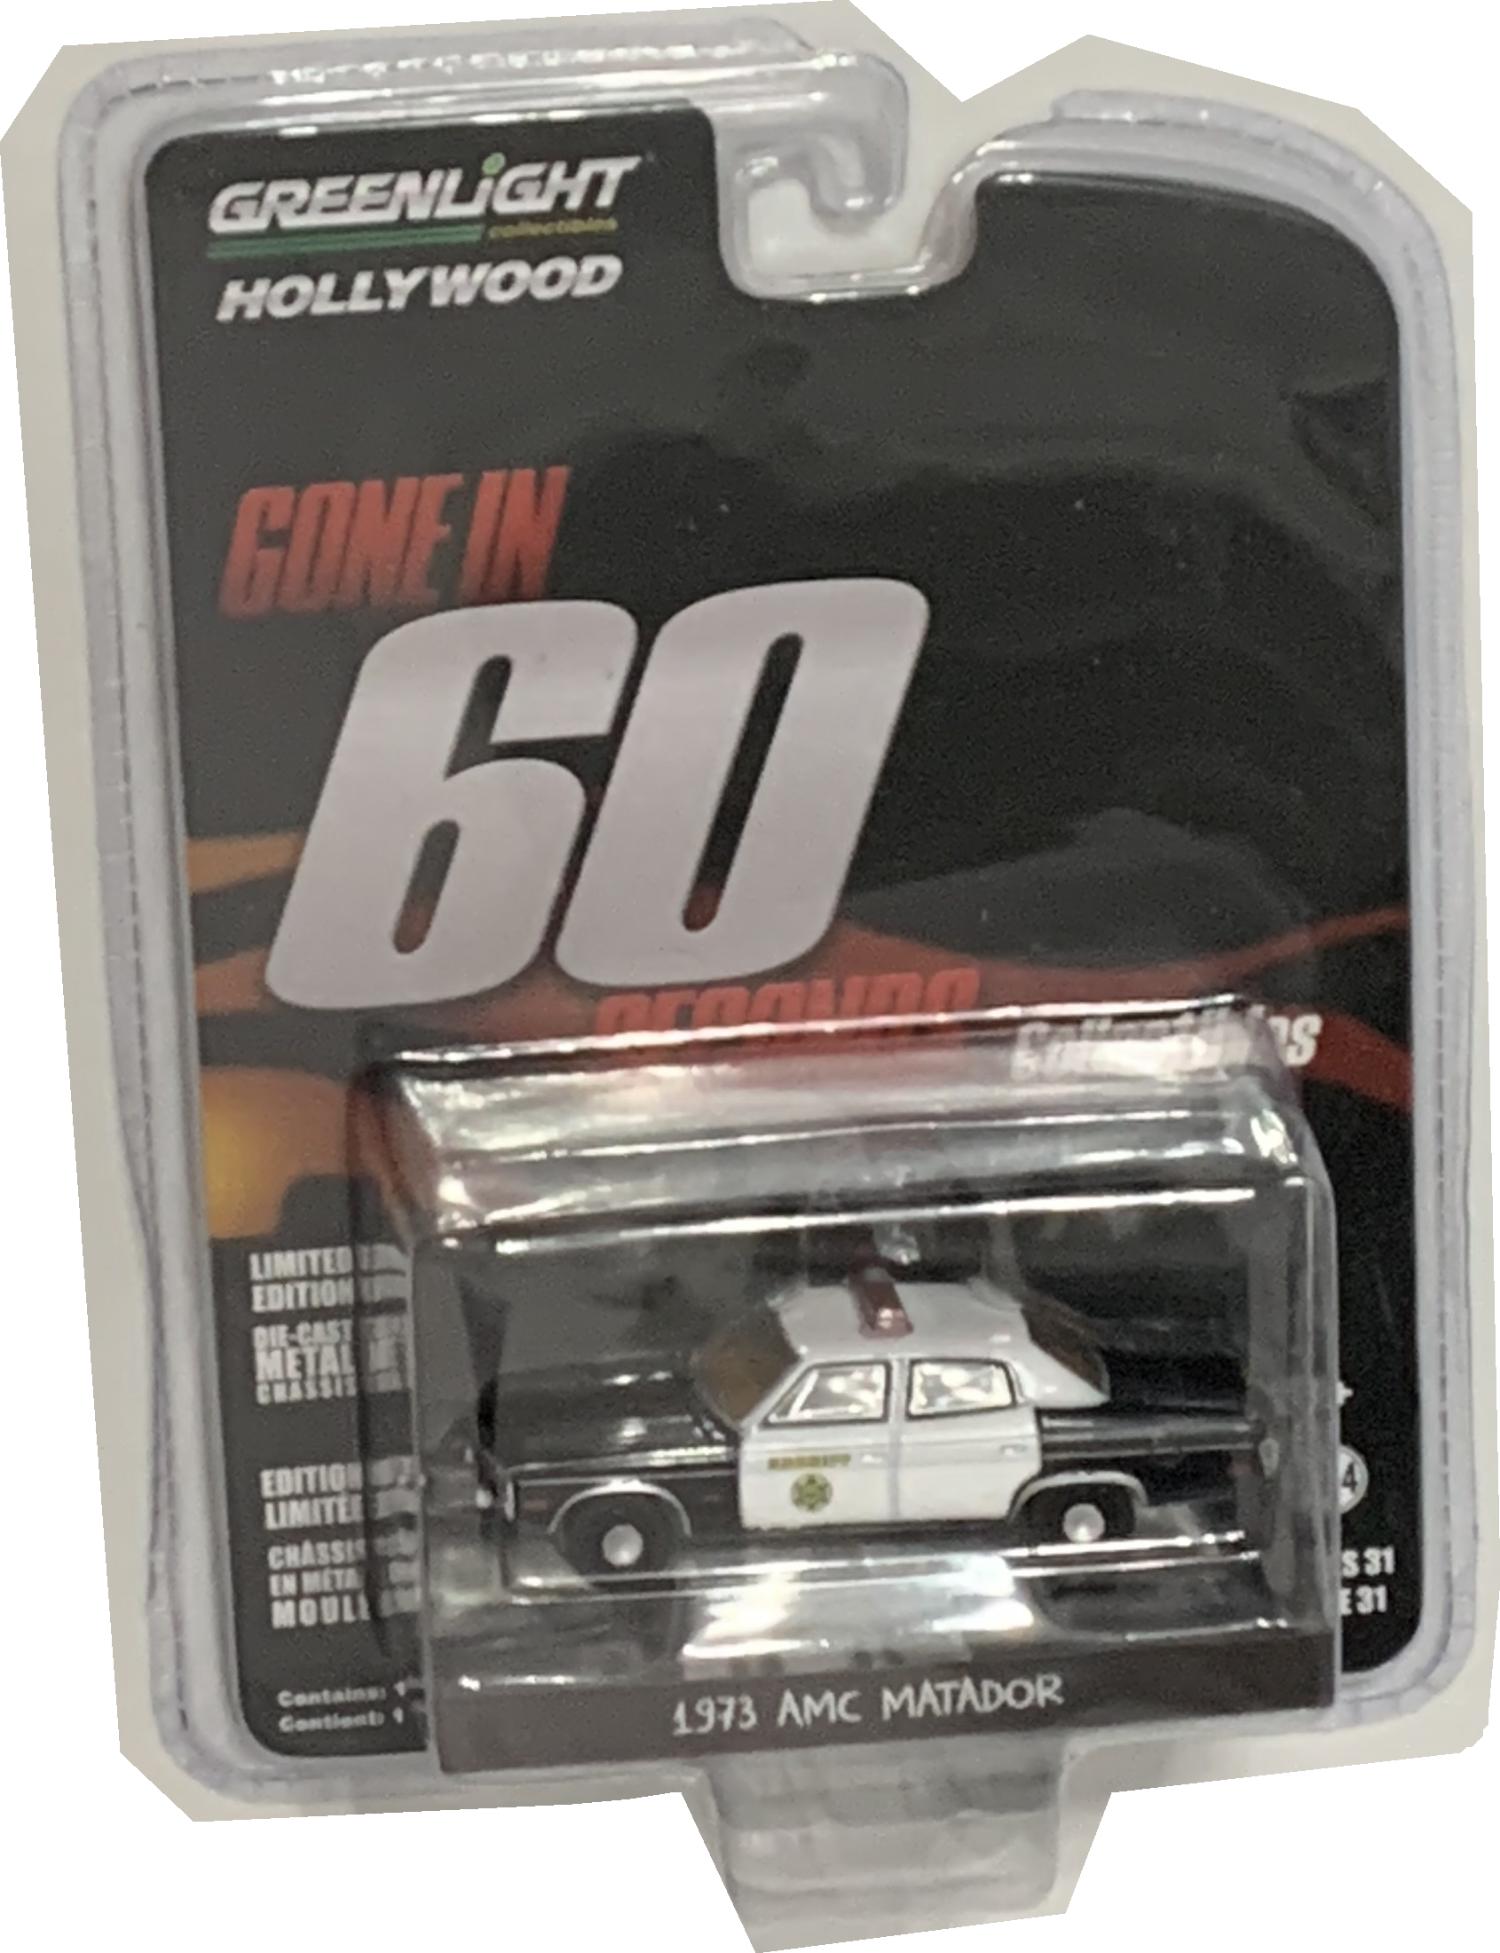 Gone in 60 Seconds 1973 AMC Matador in black and white 1:64 scale model from Greenlight, limited edition model